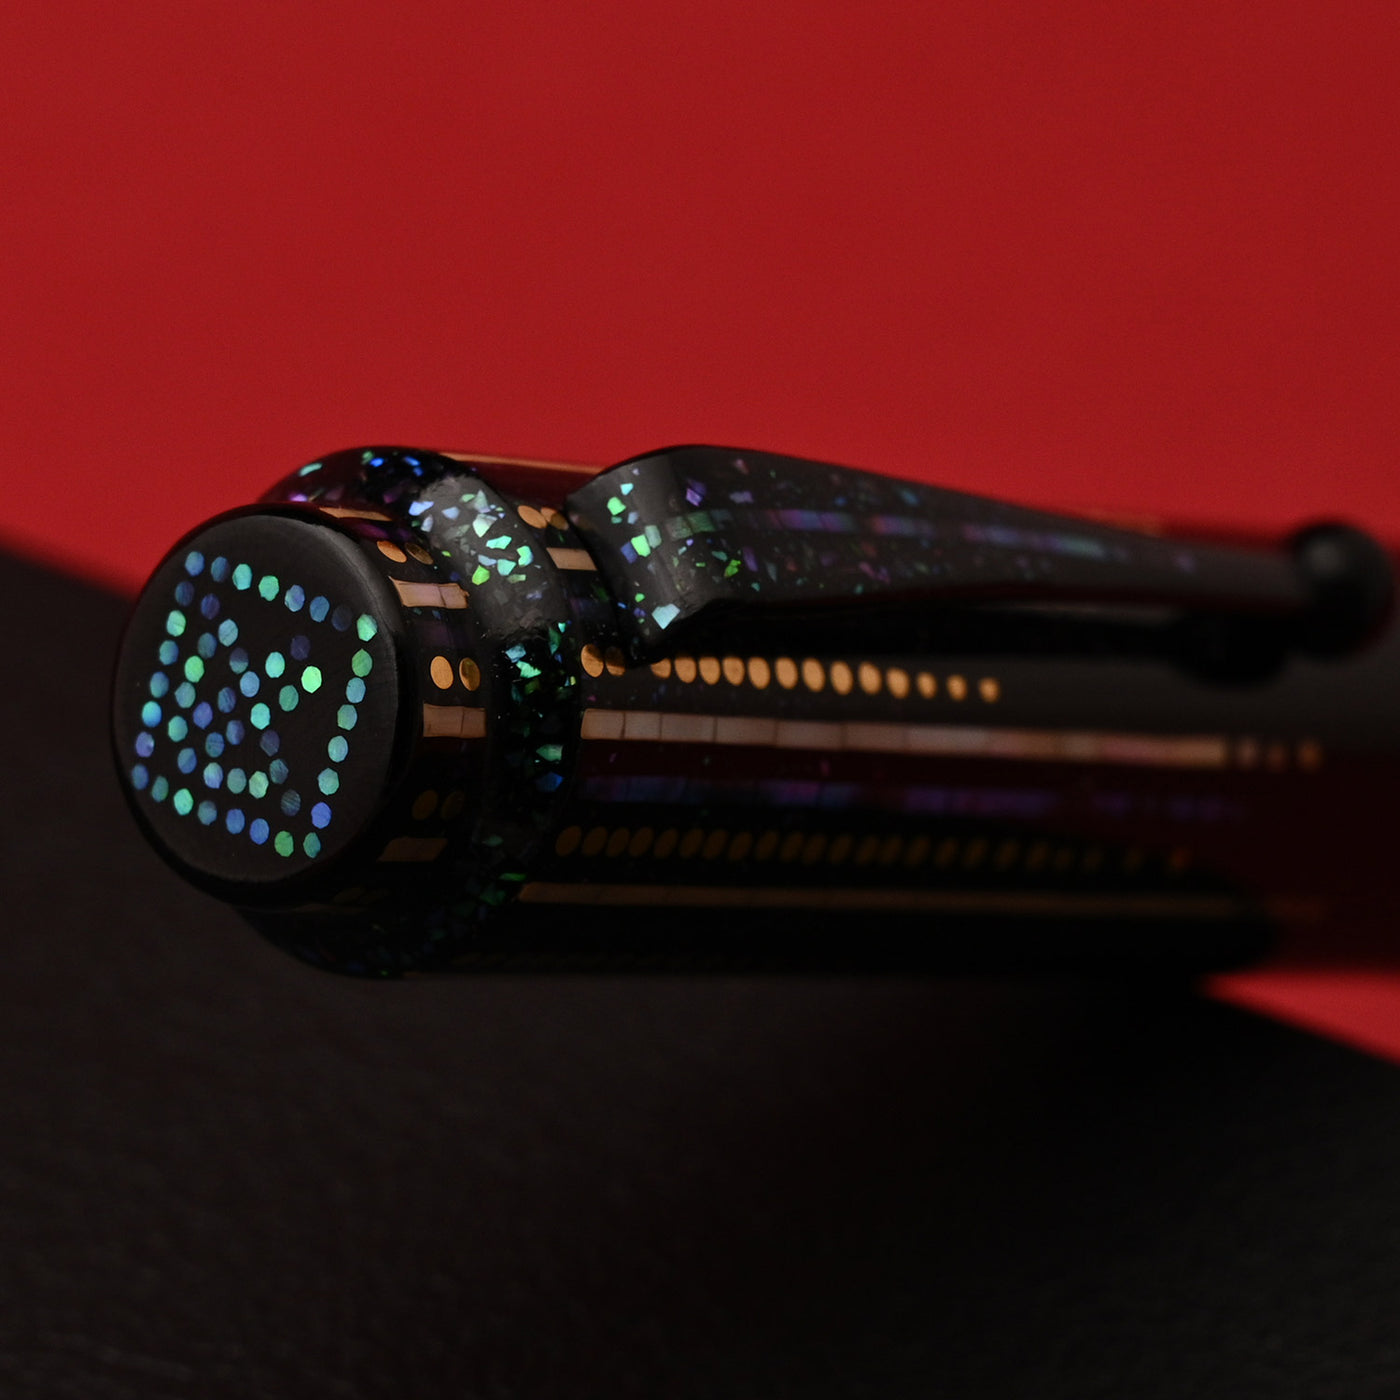 AP Limited Editions - The Writer Maki-e Art Fountain Pen - Radiance 8